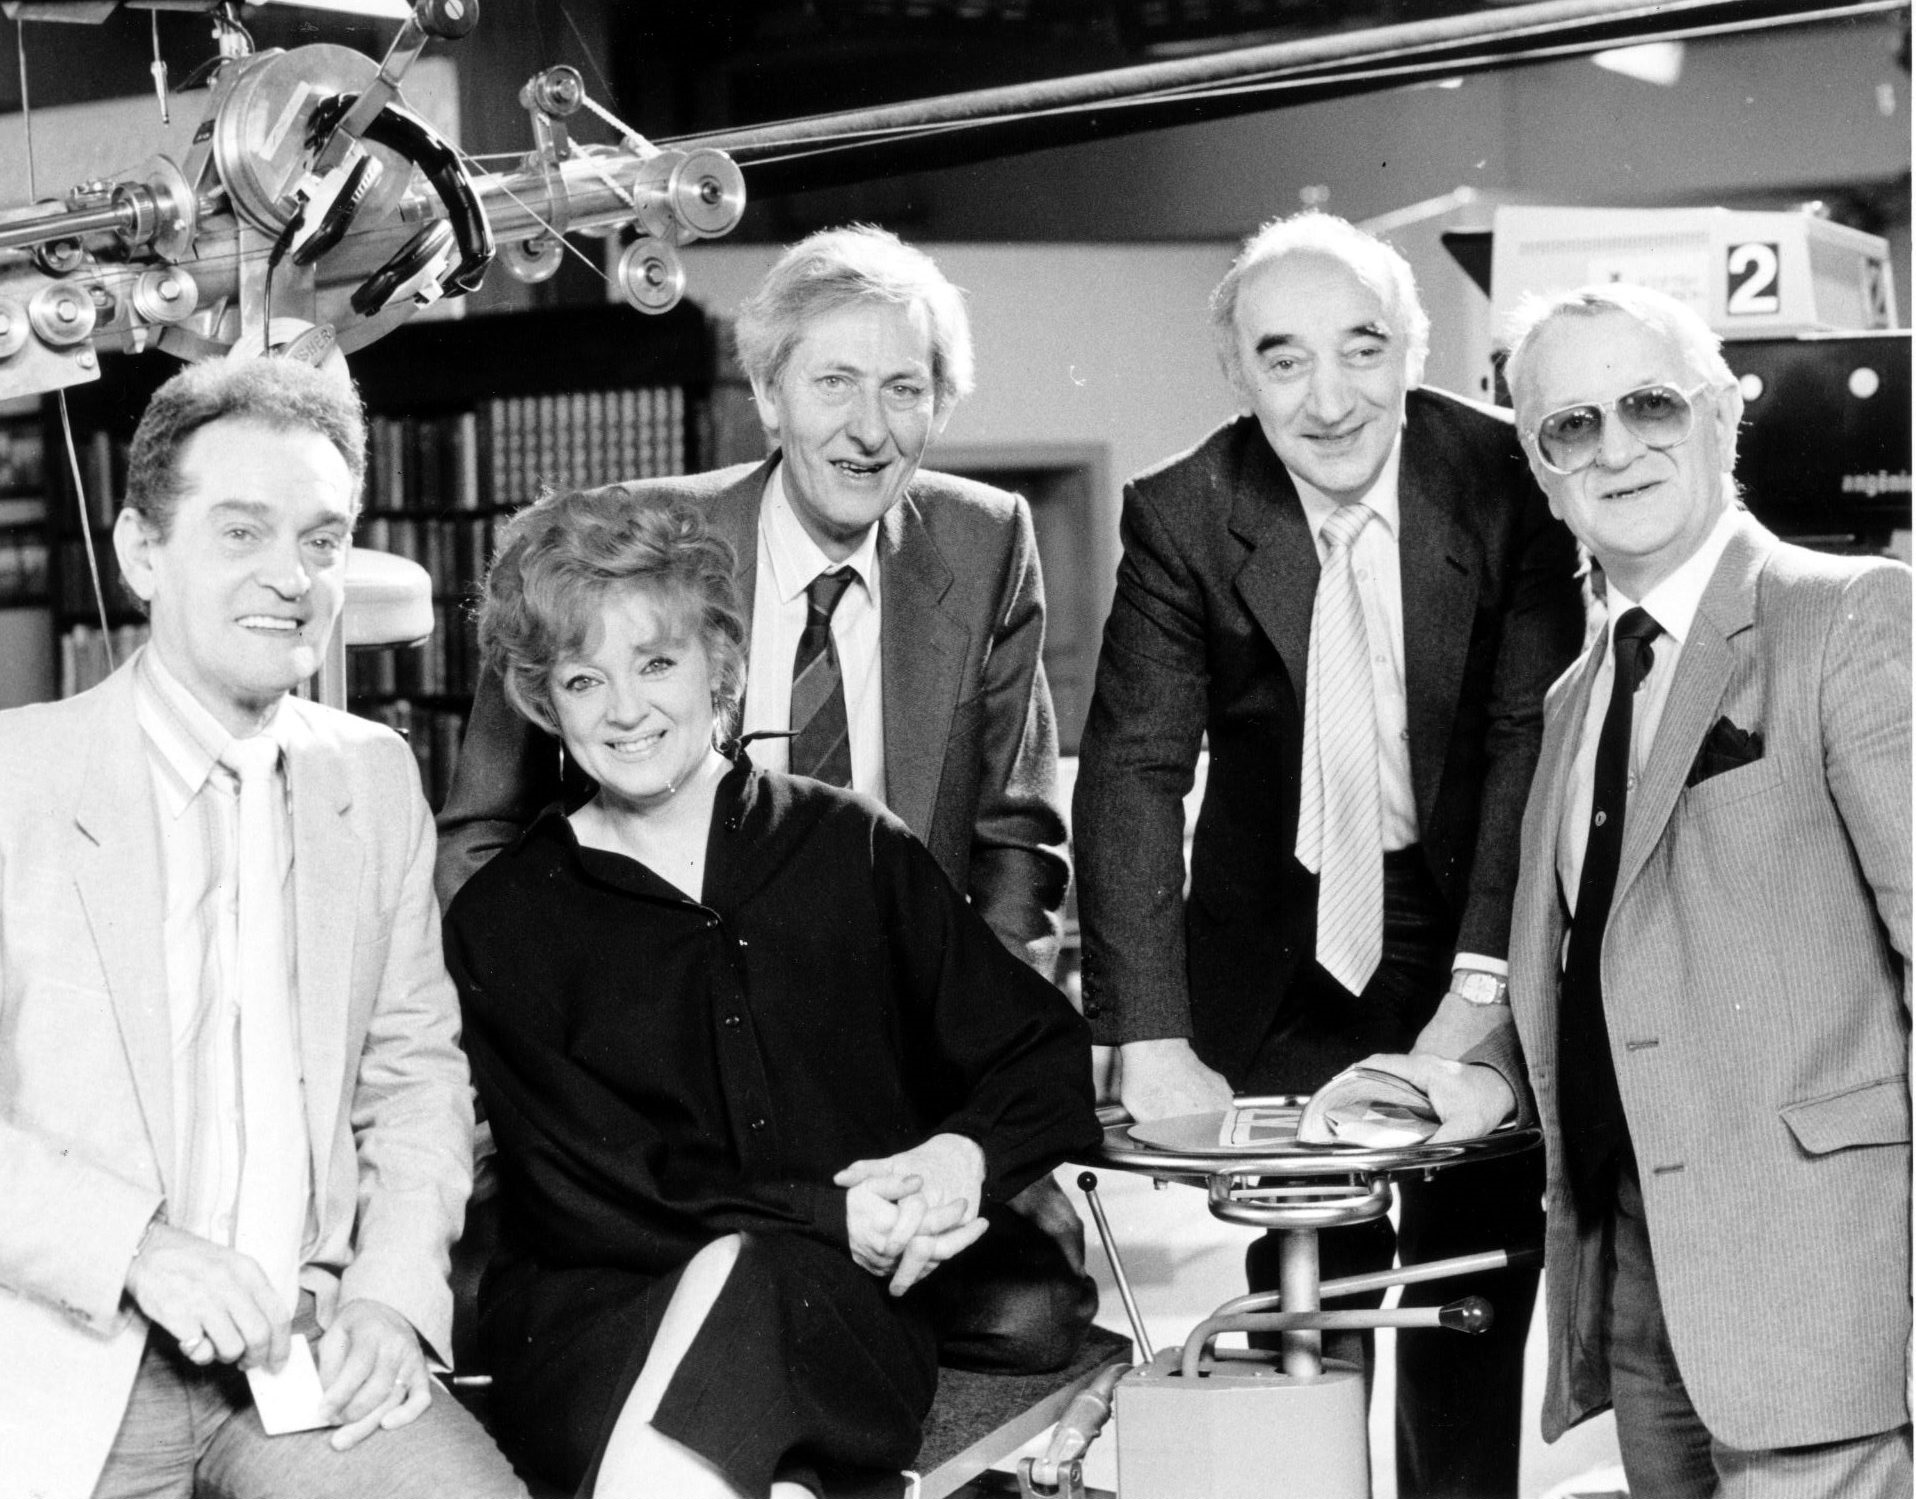 Scottish Televisions One OClock Gang, Charlie Sim, Dorothy Paul, Jimmy Nairn, Larry Marshall and Wally Butler Pic: Herald and Times